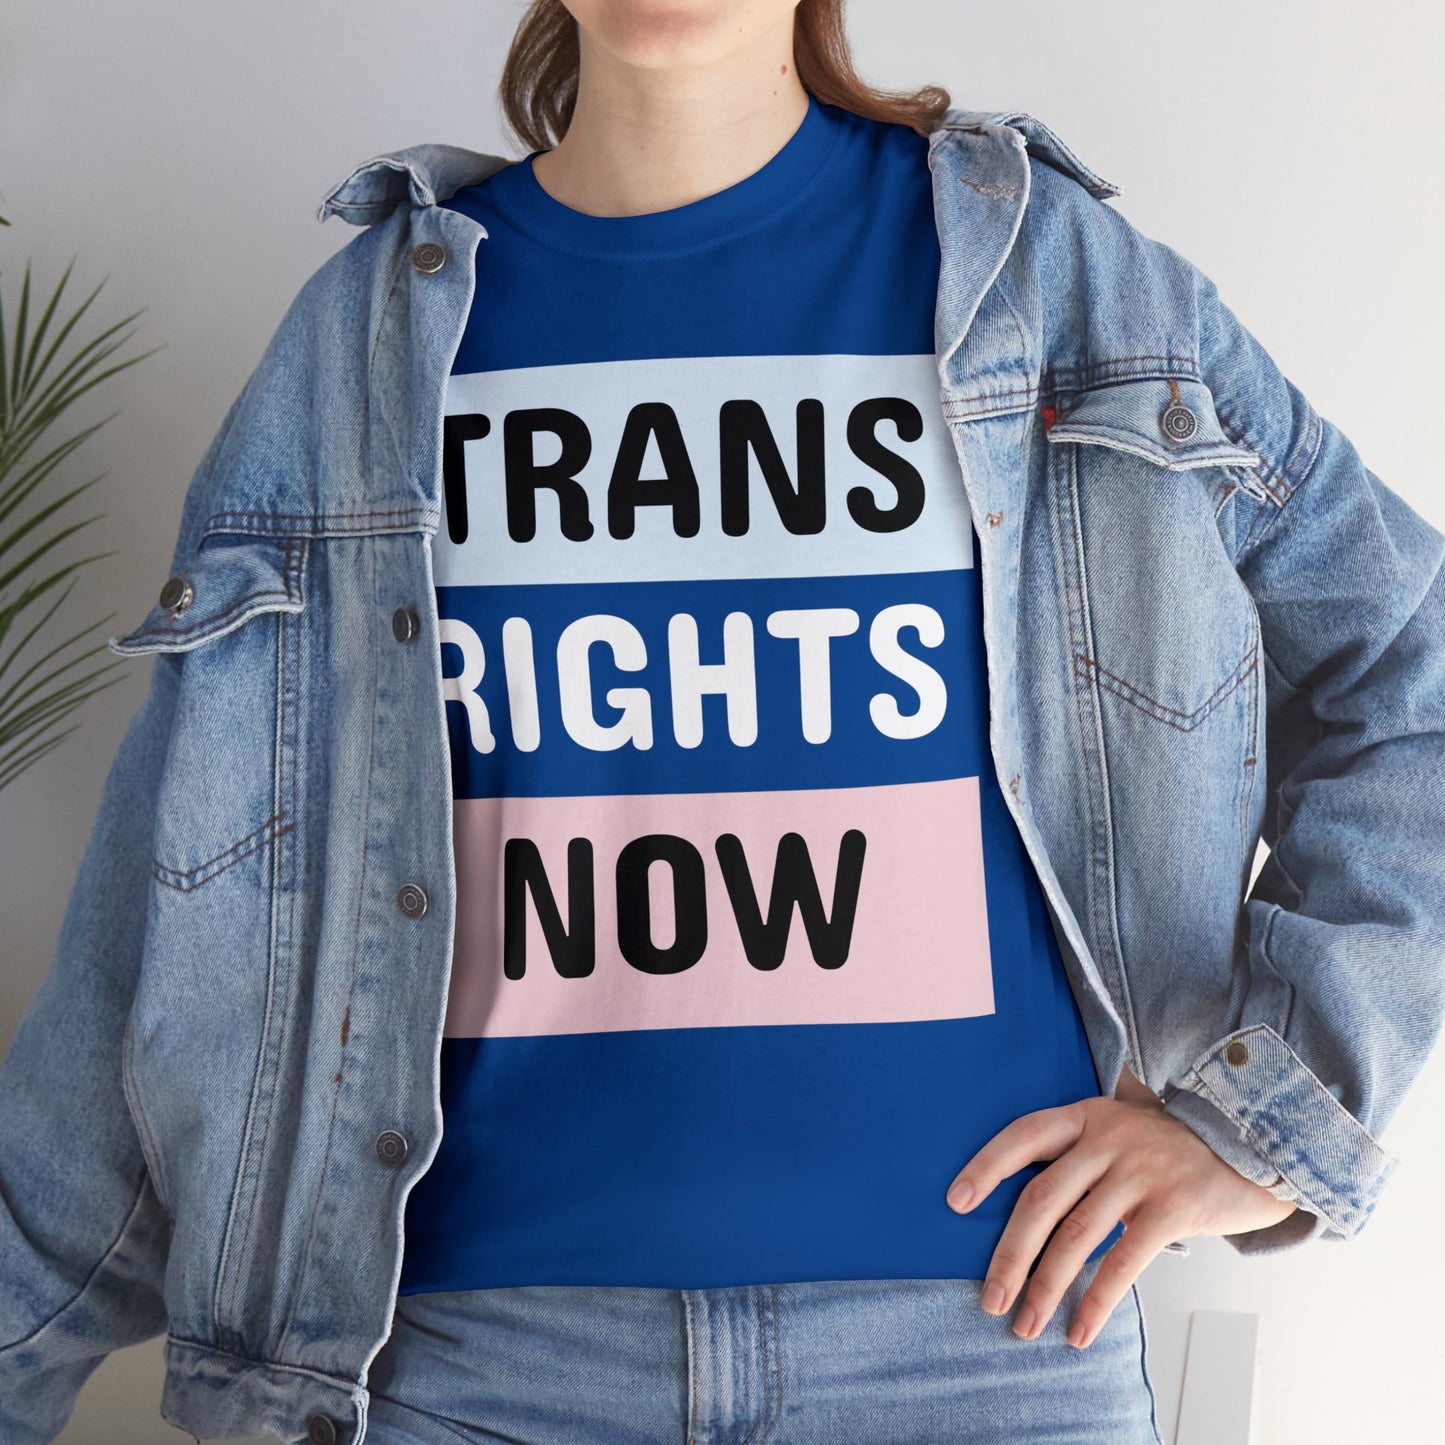 TRANS RIGHTS NOW Cotton Tee